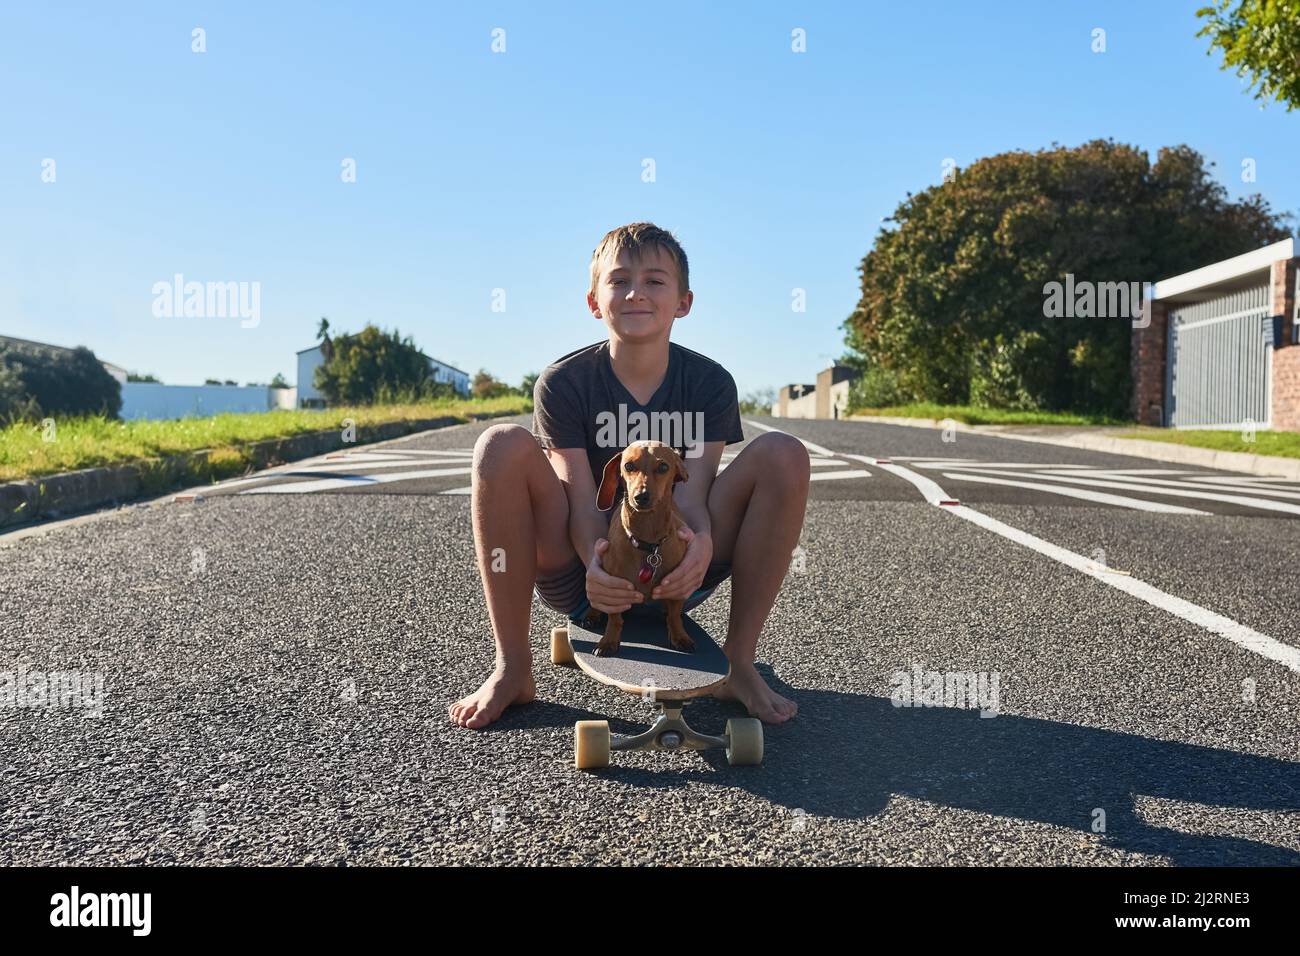 Teaching my dog has to skate. Full length portrait of a young boy and his dog sitting on a longboard. Stock Photo